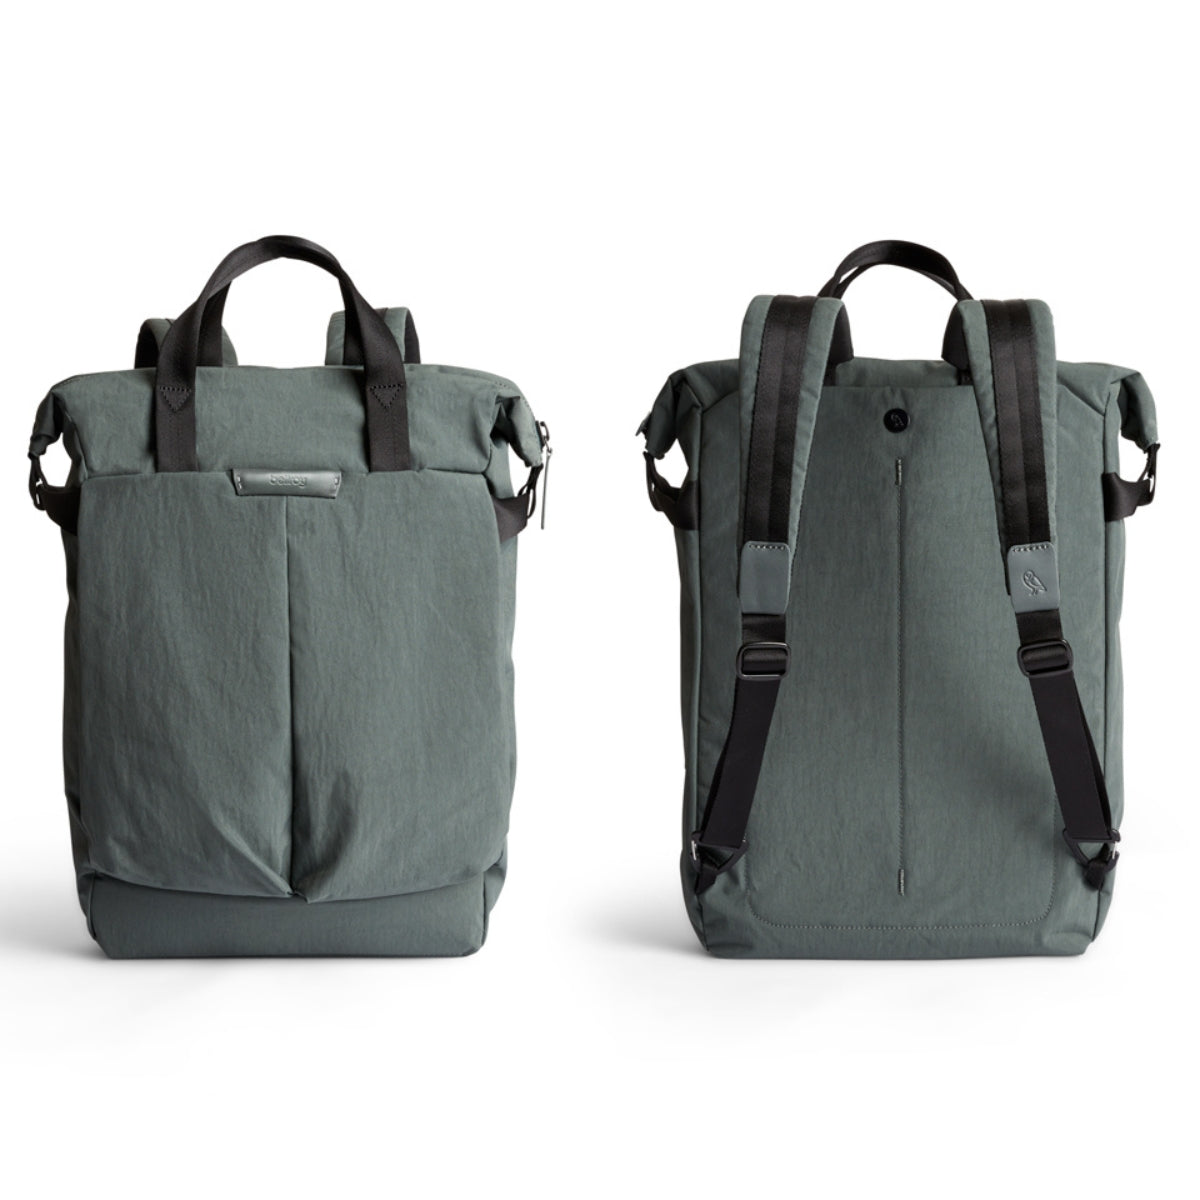 Bellroy Tokyo Totepack Compact in Everglade